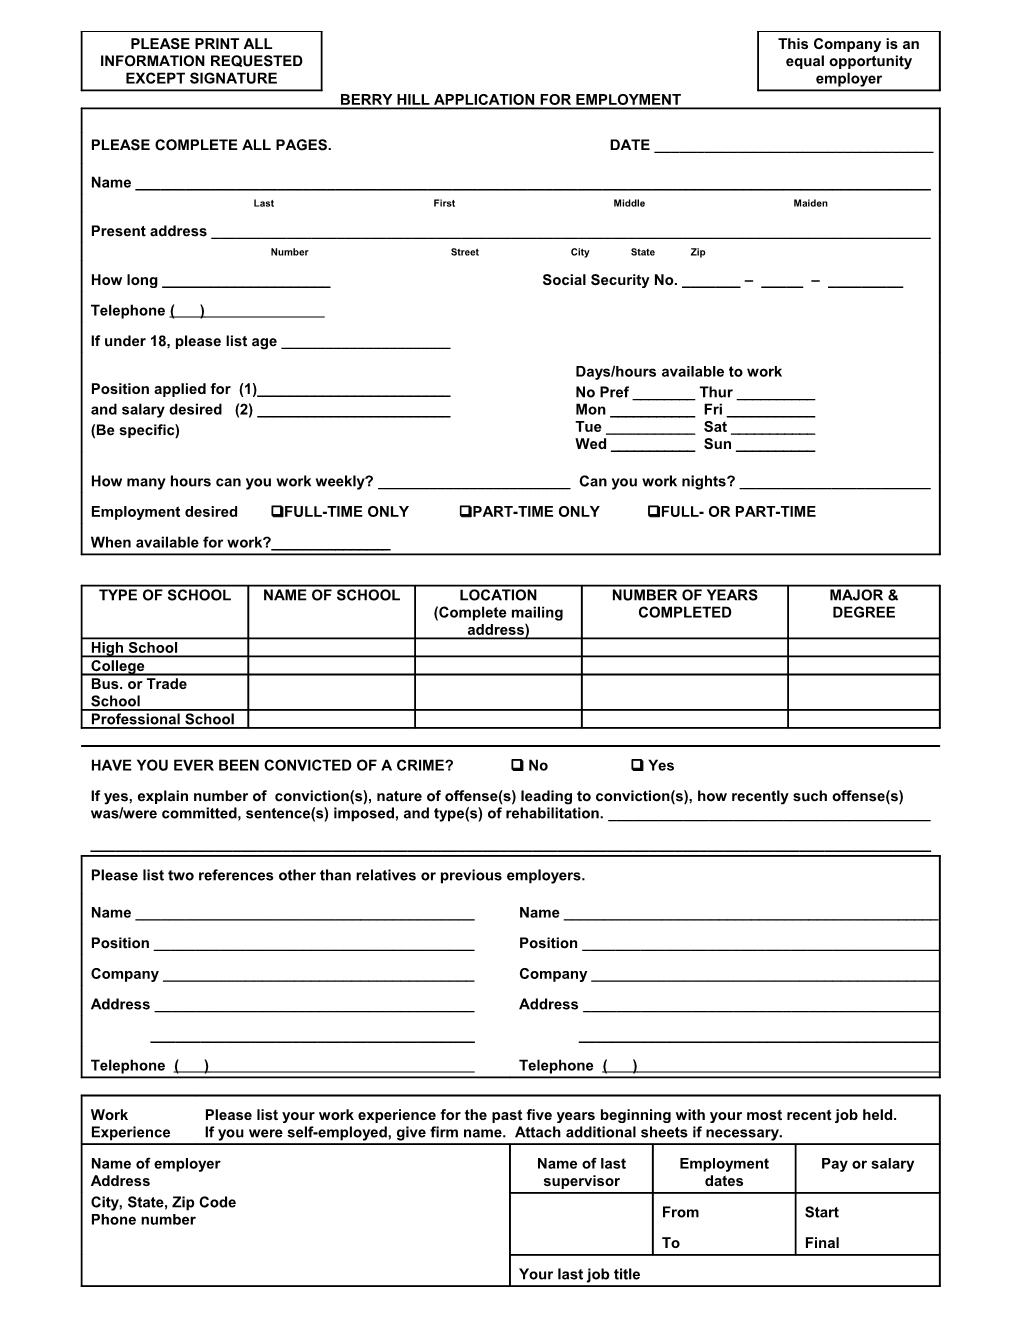 Sample Employment Application Form s4